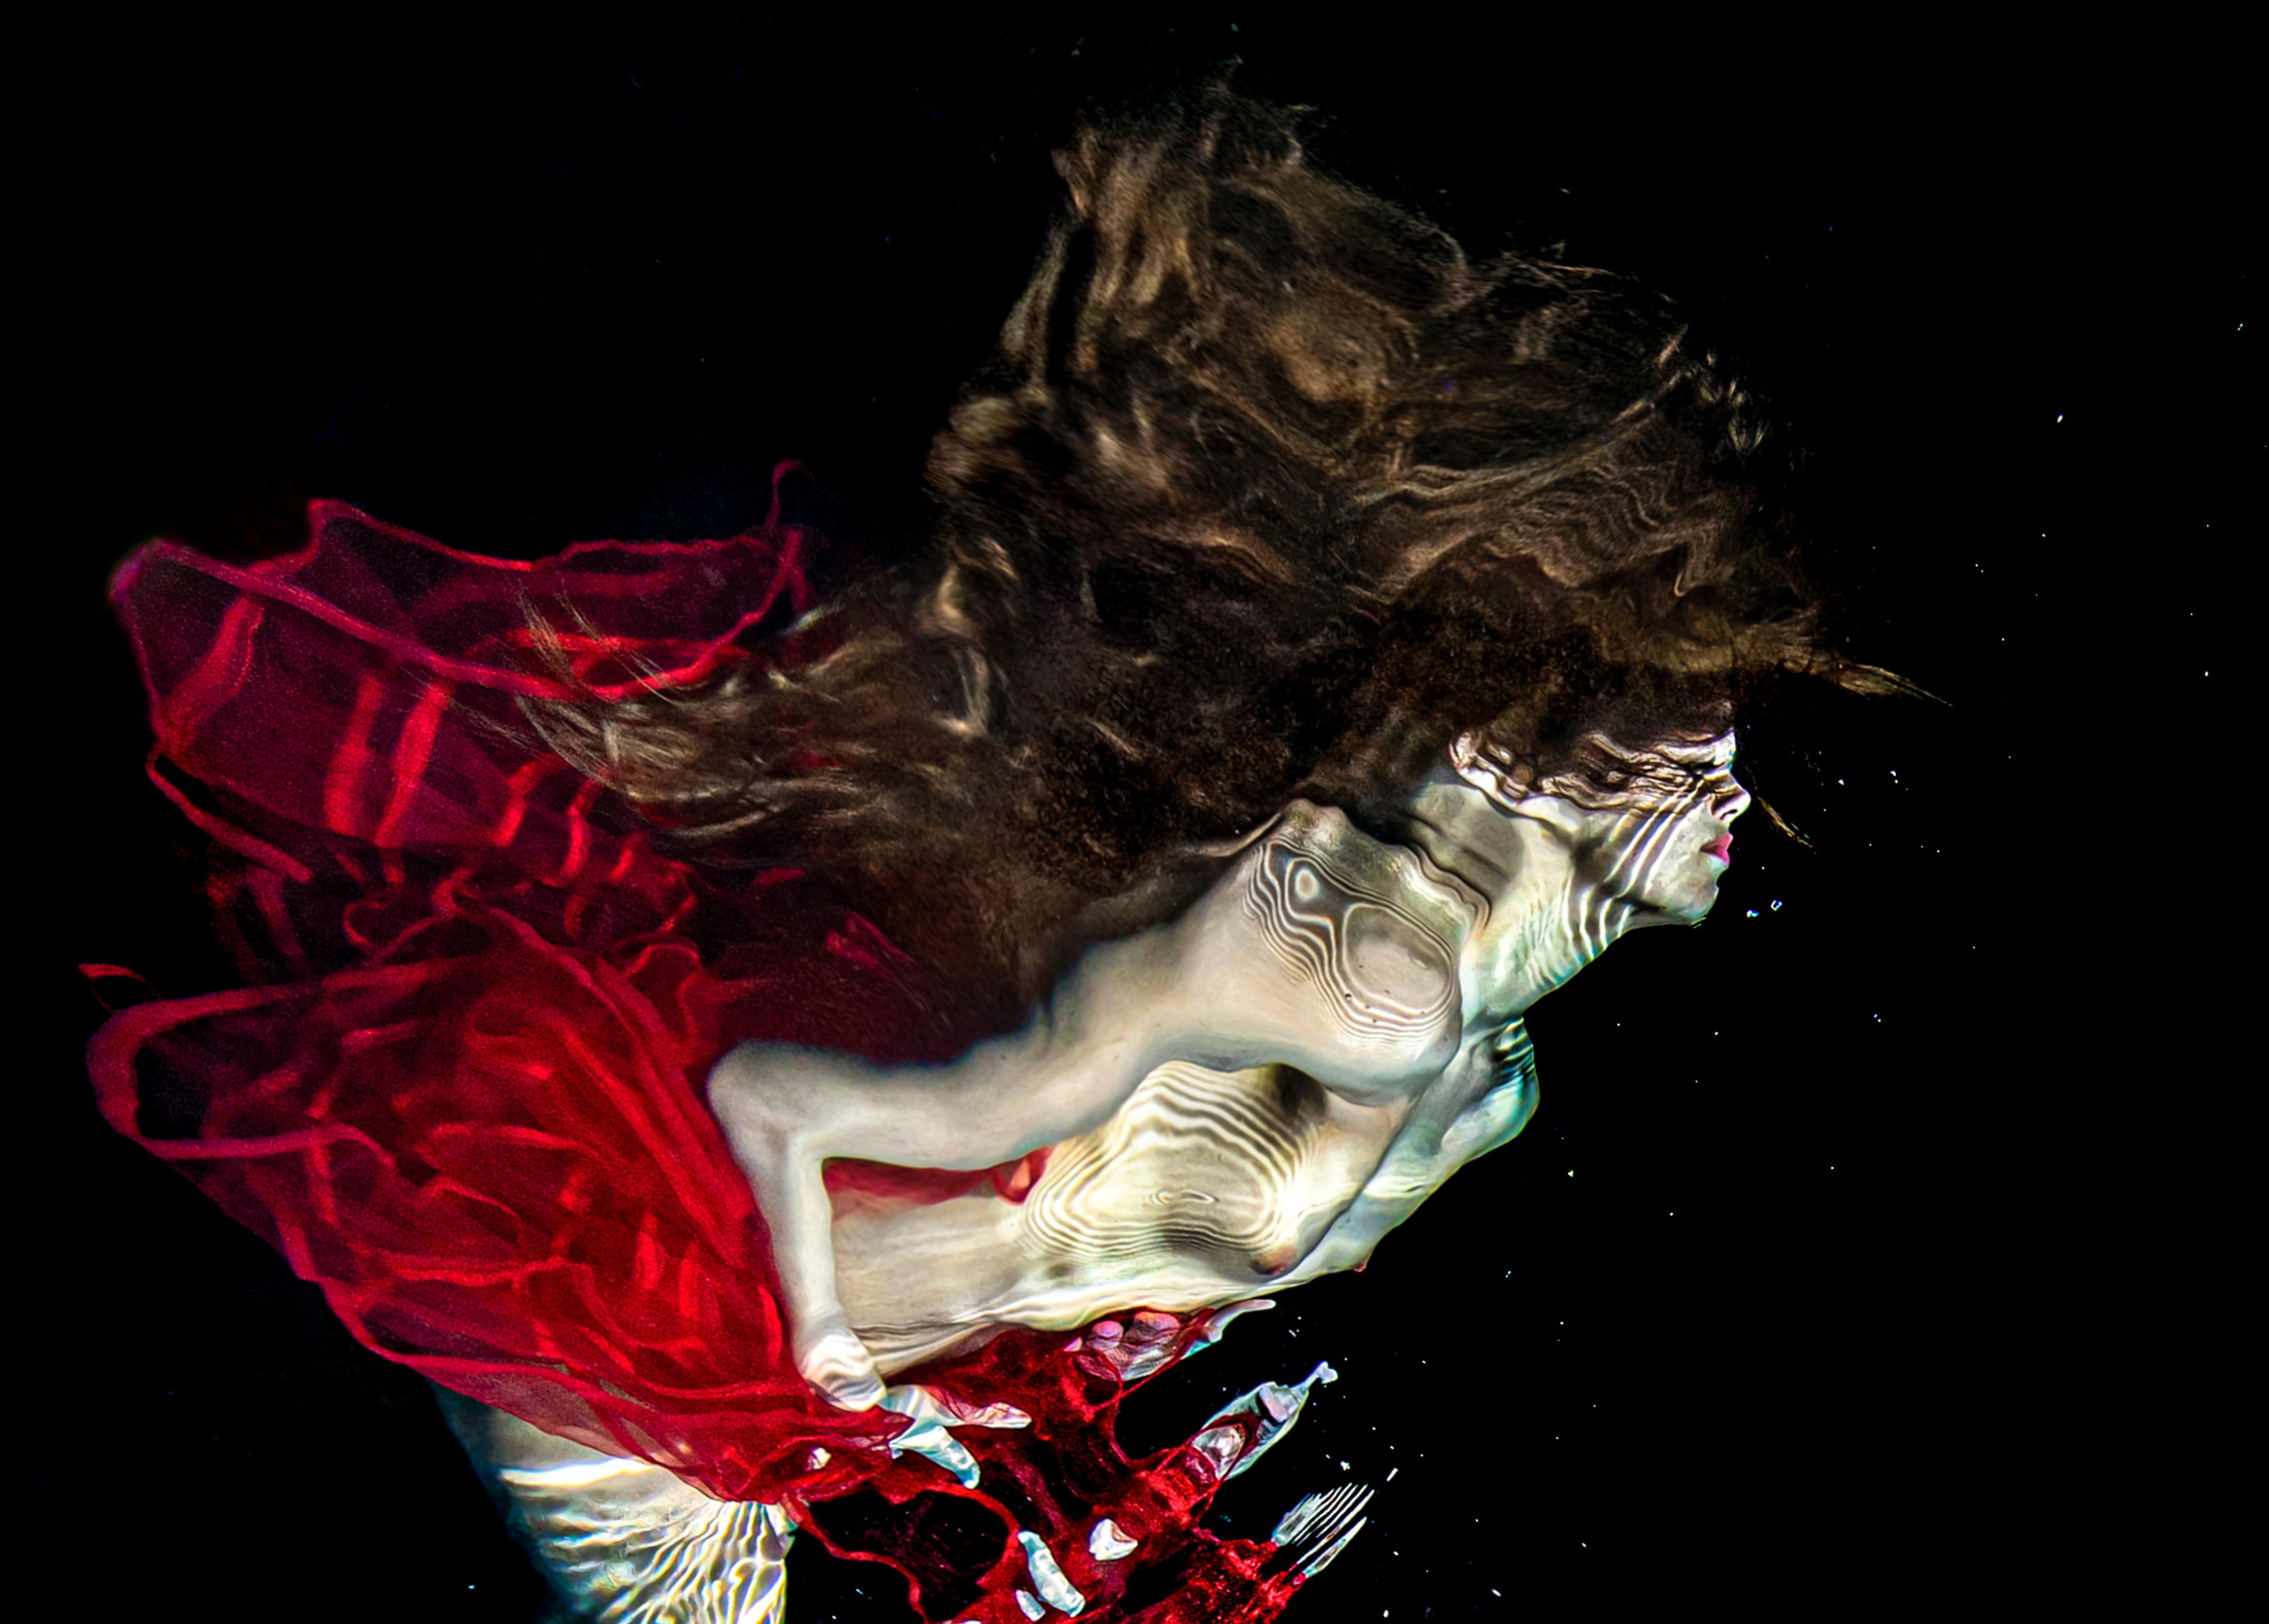 Salsa - underwater nude photograph - series REFLECTIONS - archival pigment 35х53 - Photograph by Alex Sher